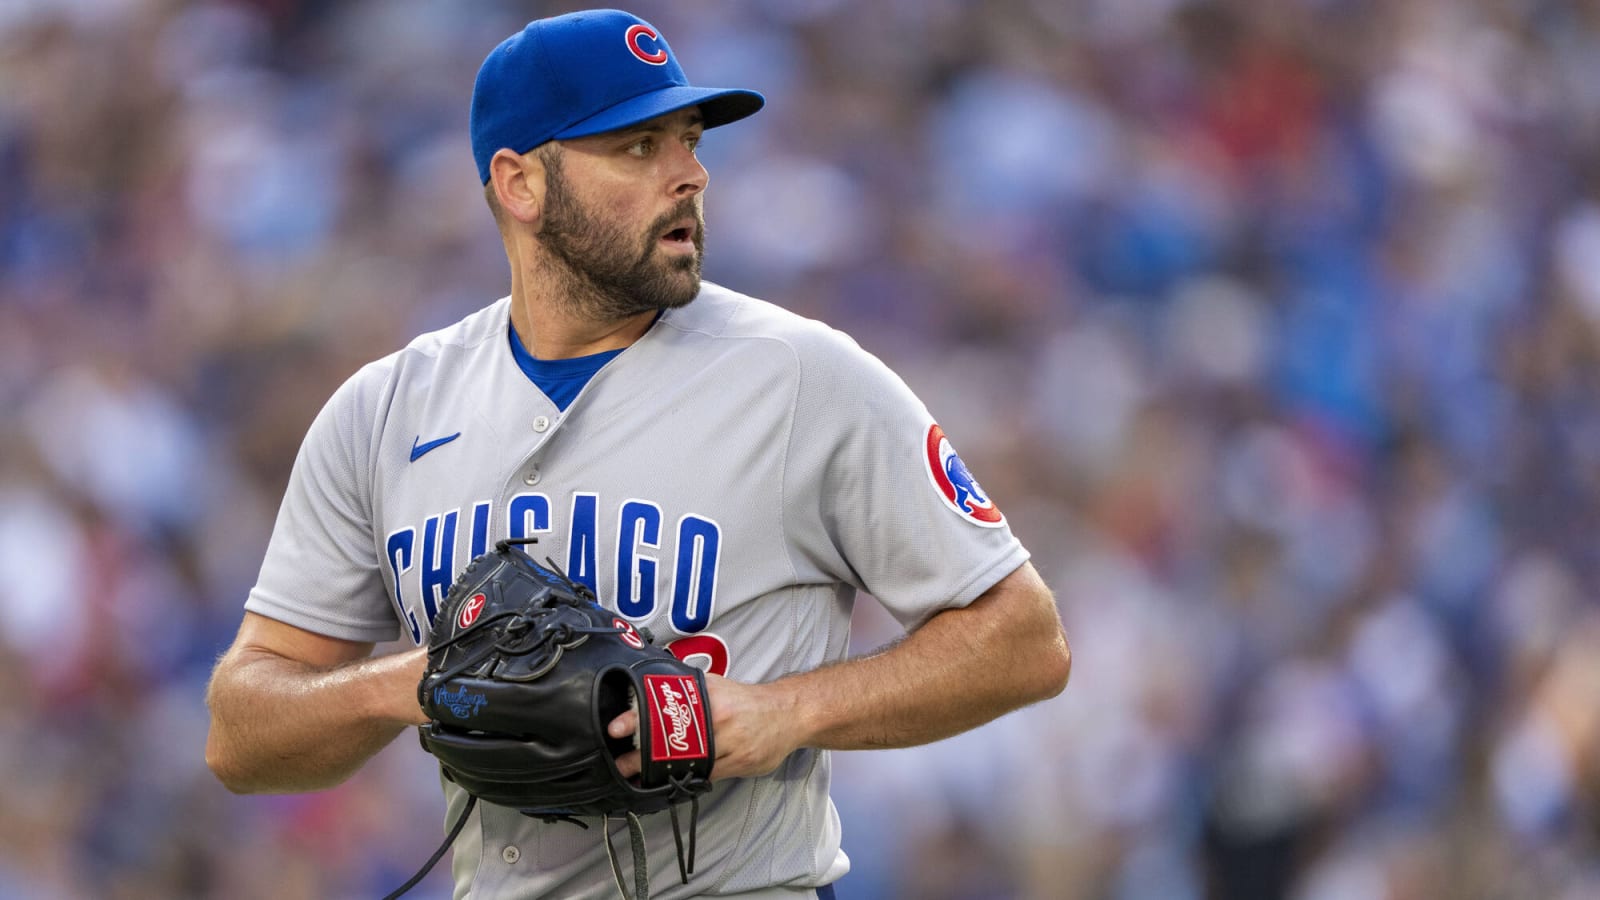 Michael Fulmer: The Unsung Hero of Cubs’ Walk-Off vs. White Sox